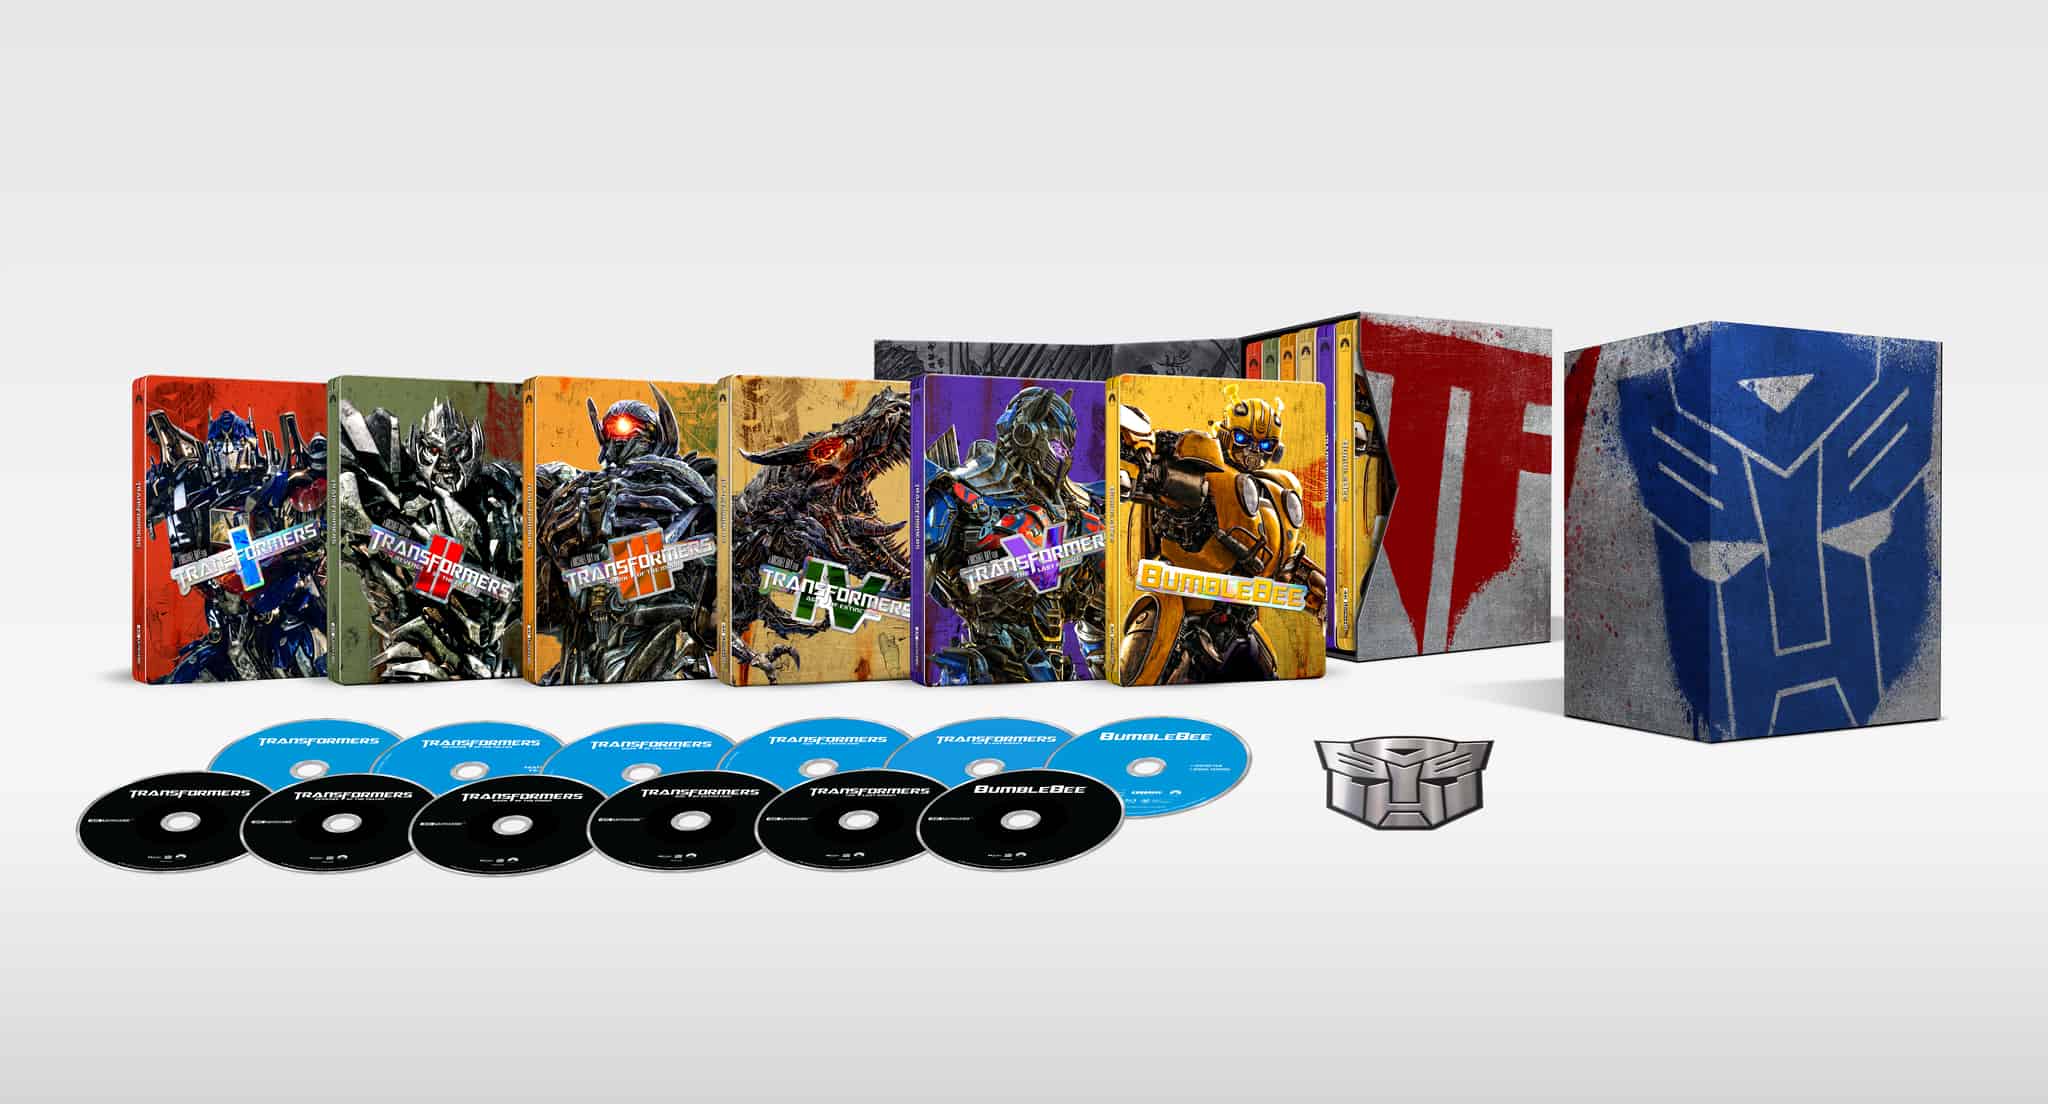 Get Ready for Action with the TRANSFORMERS 6-Movie SteelBook Collection Arriving on May 30th 48